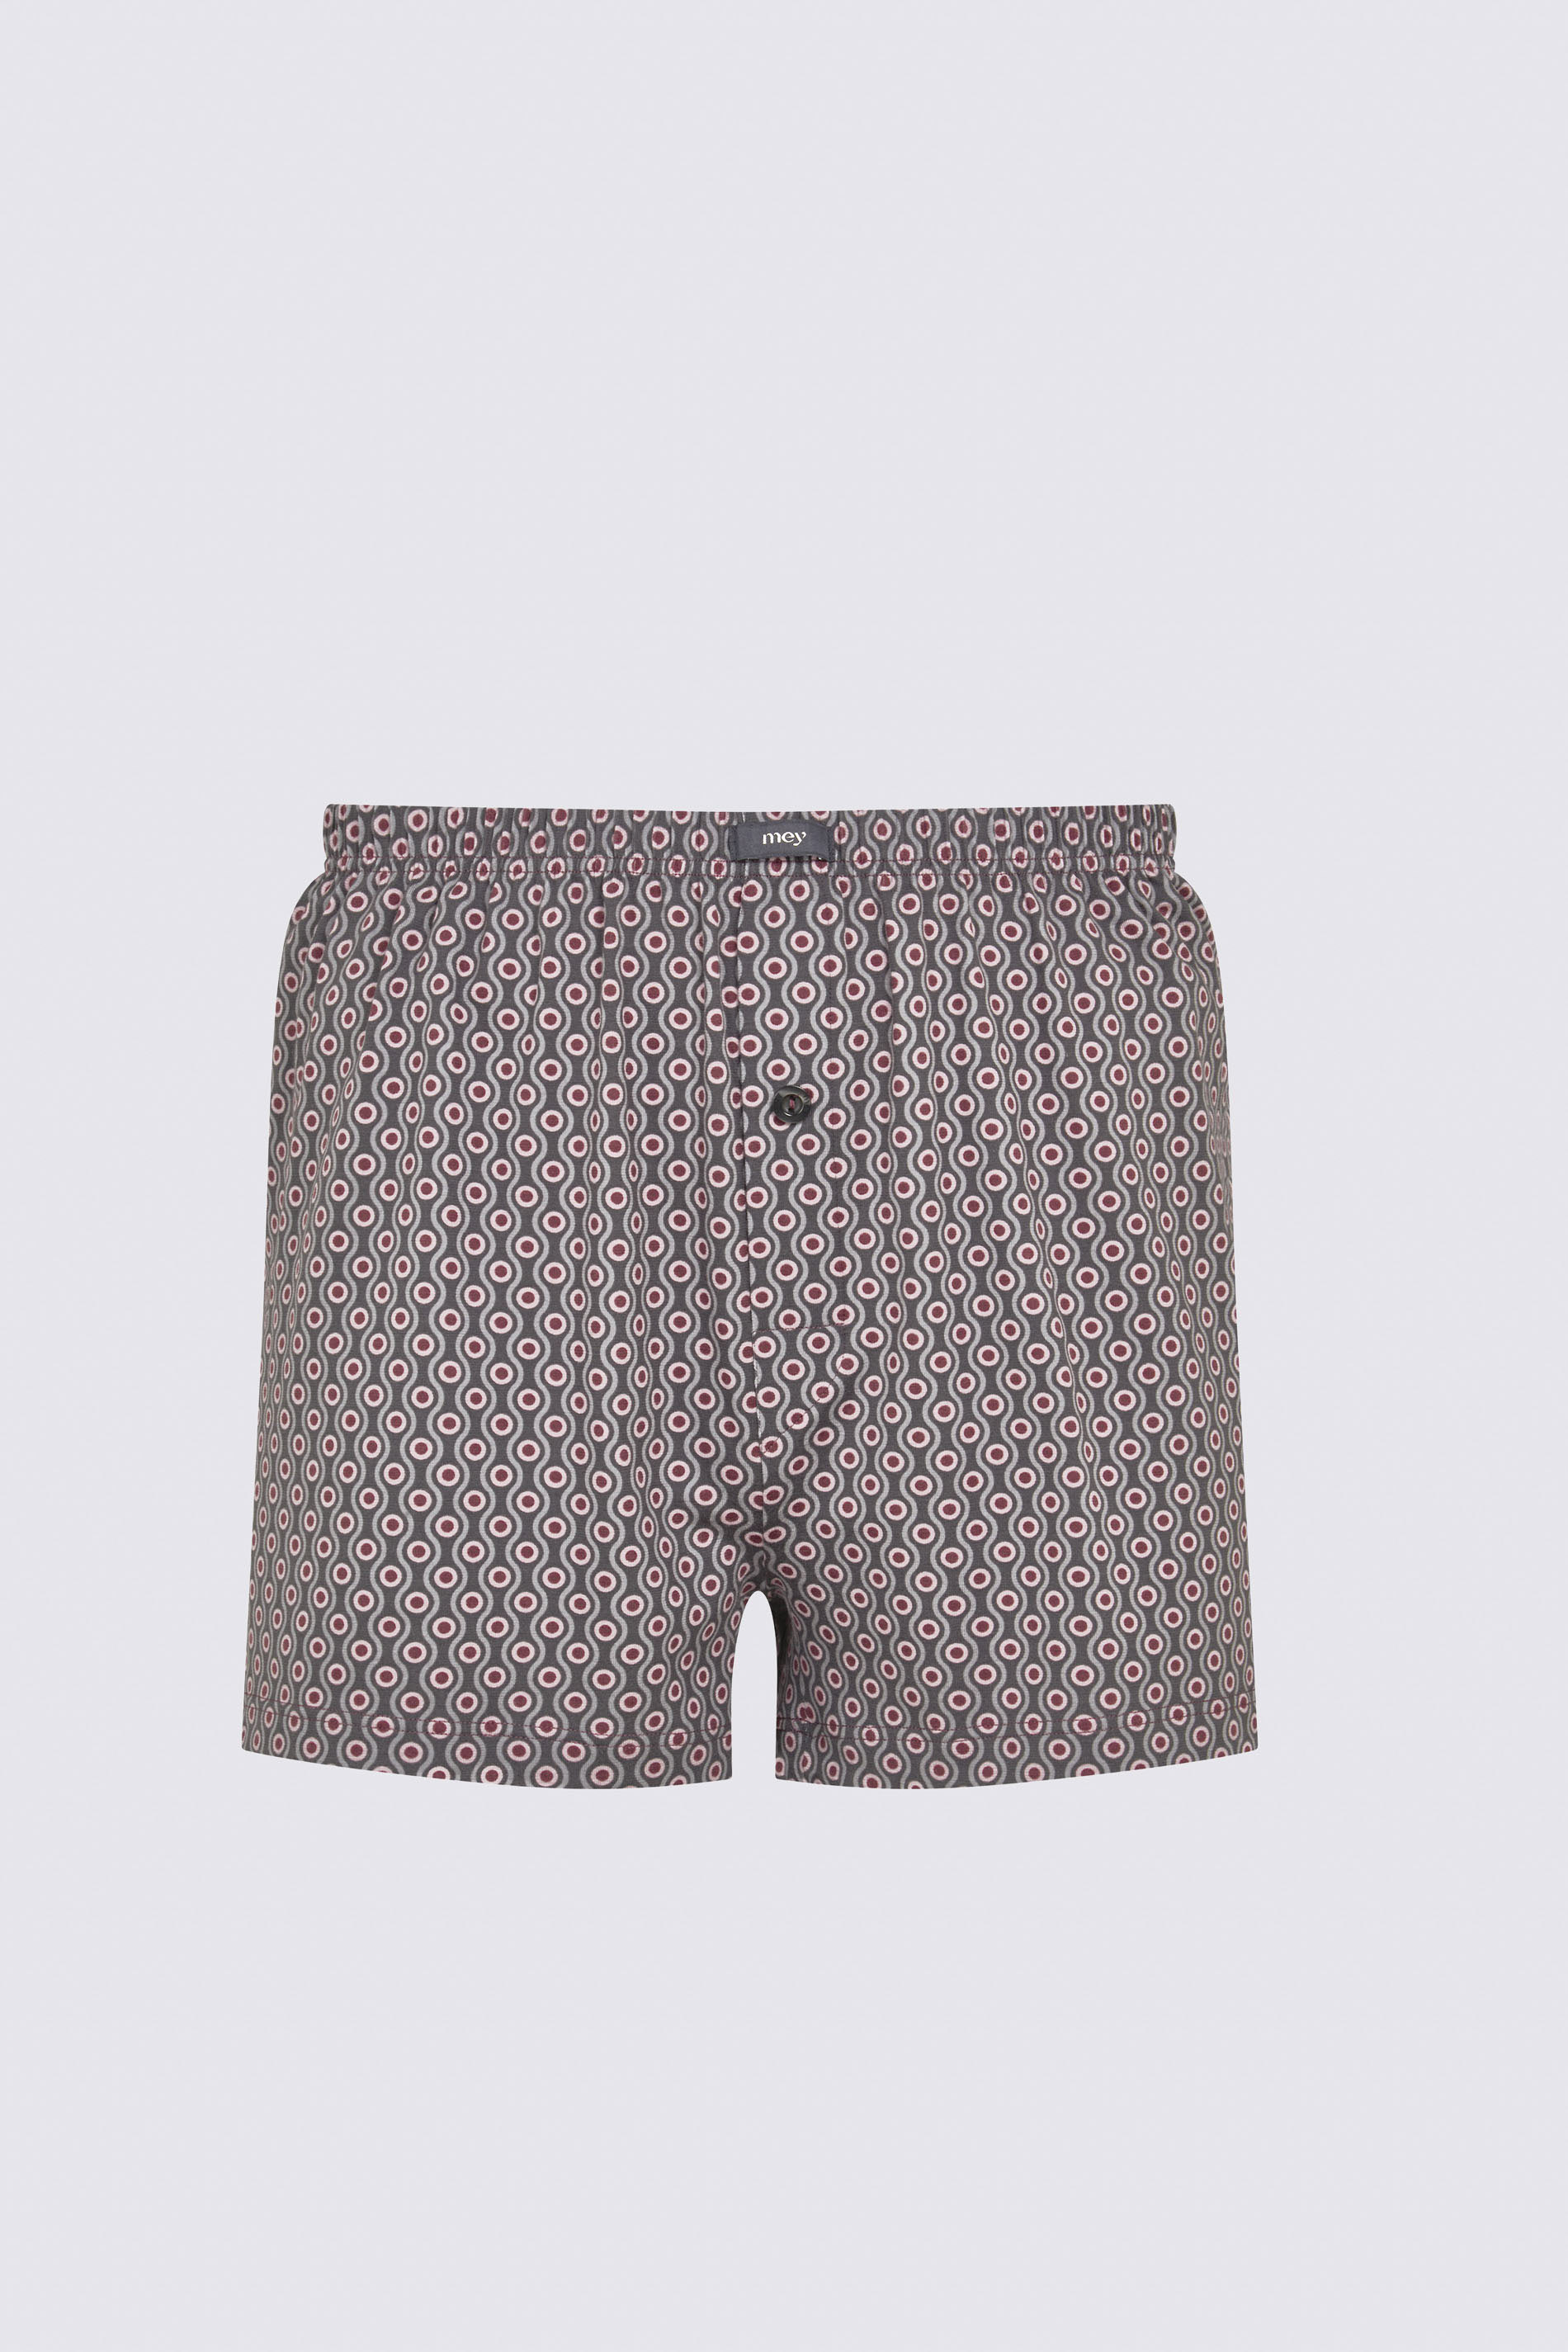 Boxer shorts Oxblood Serie 4 Col Dots Cut Out | mey®